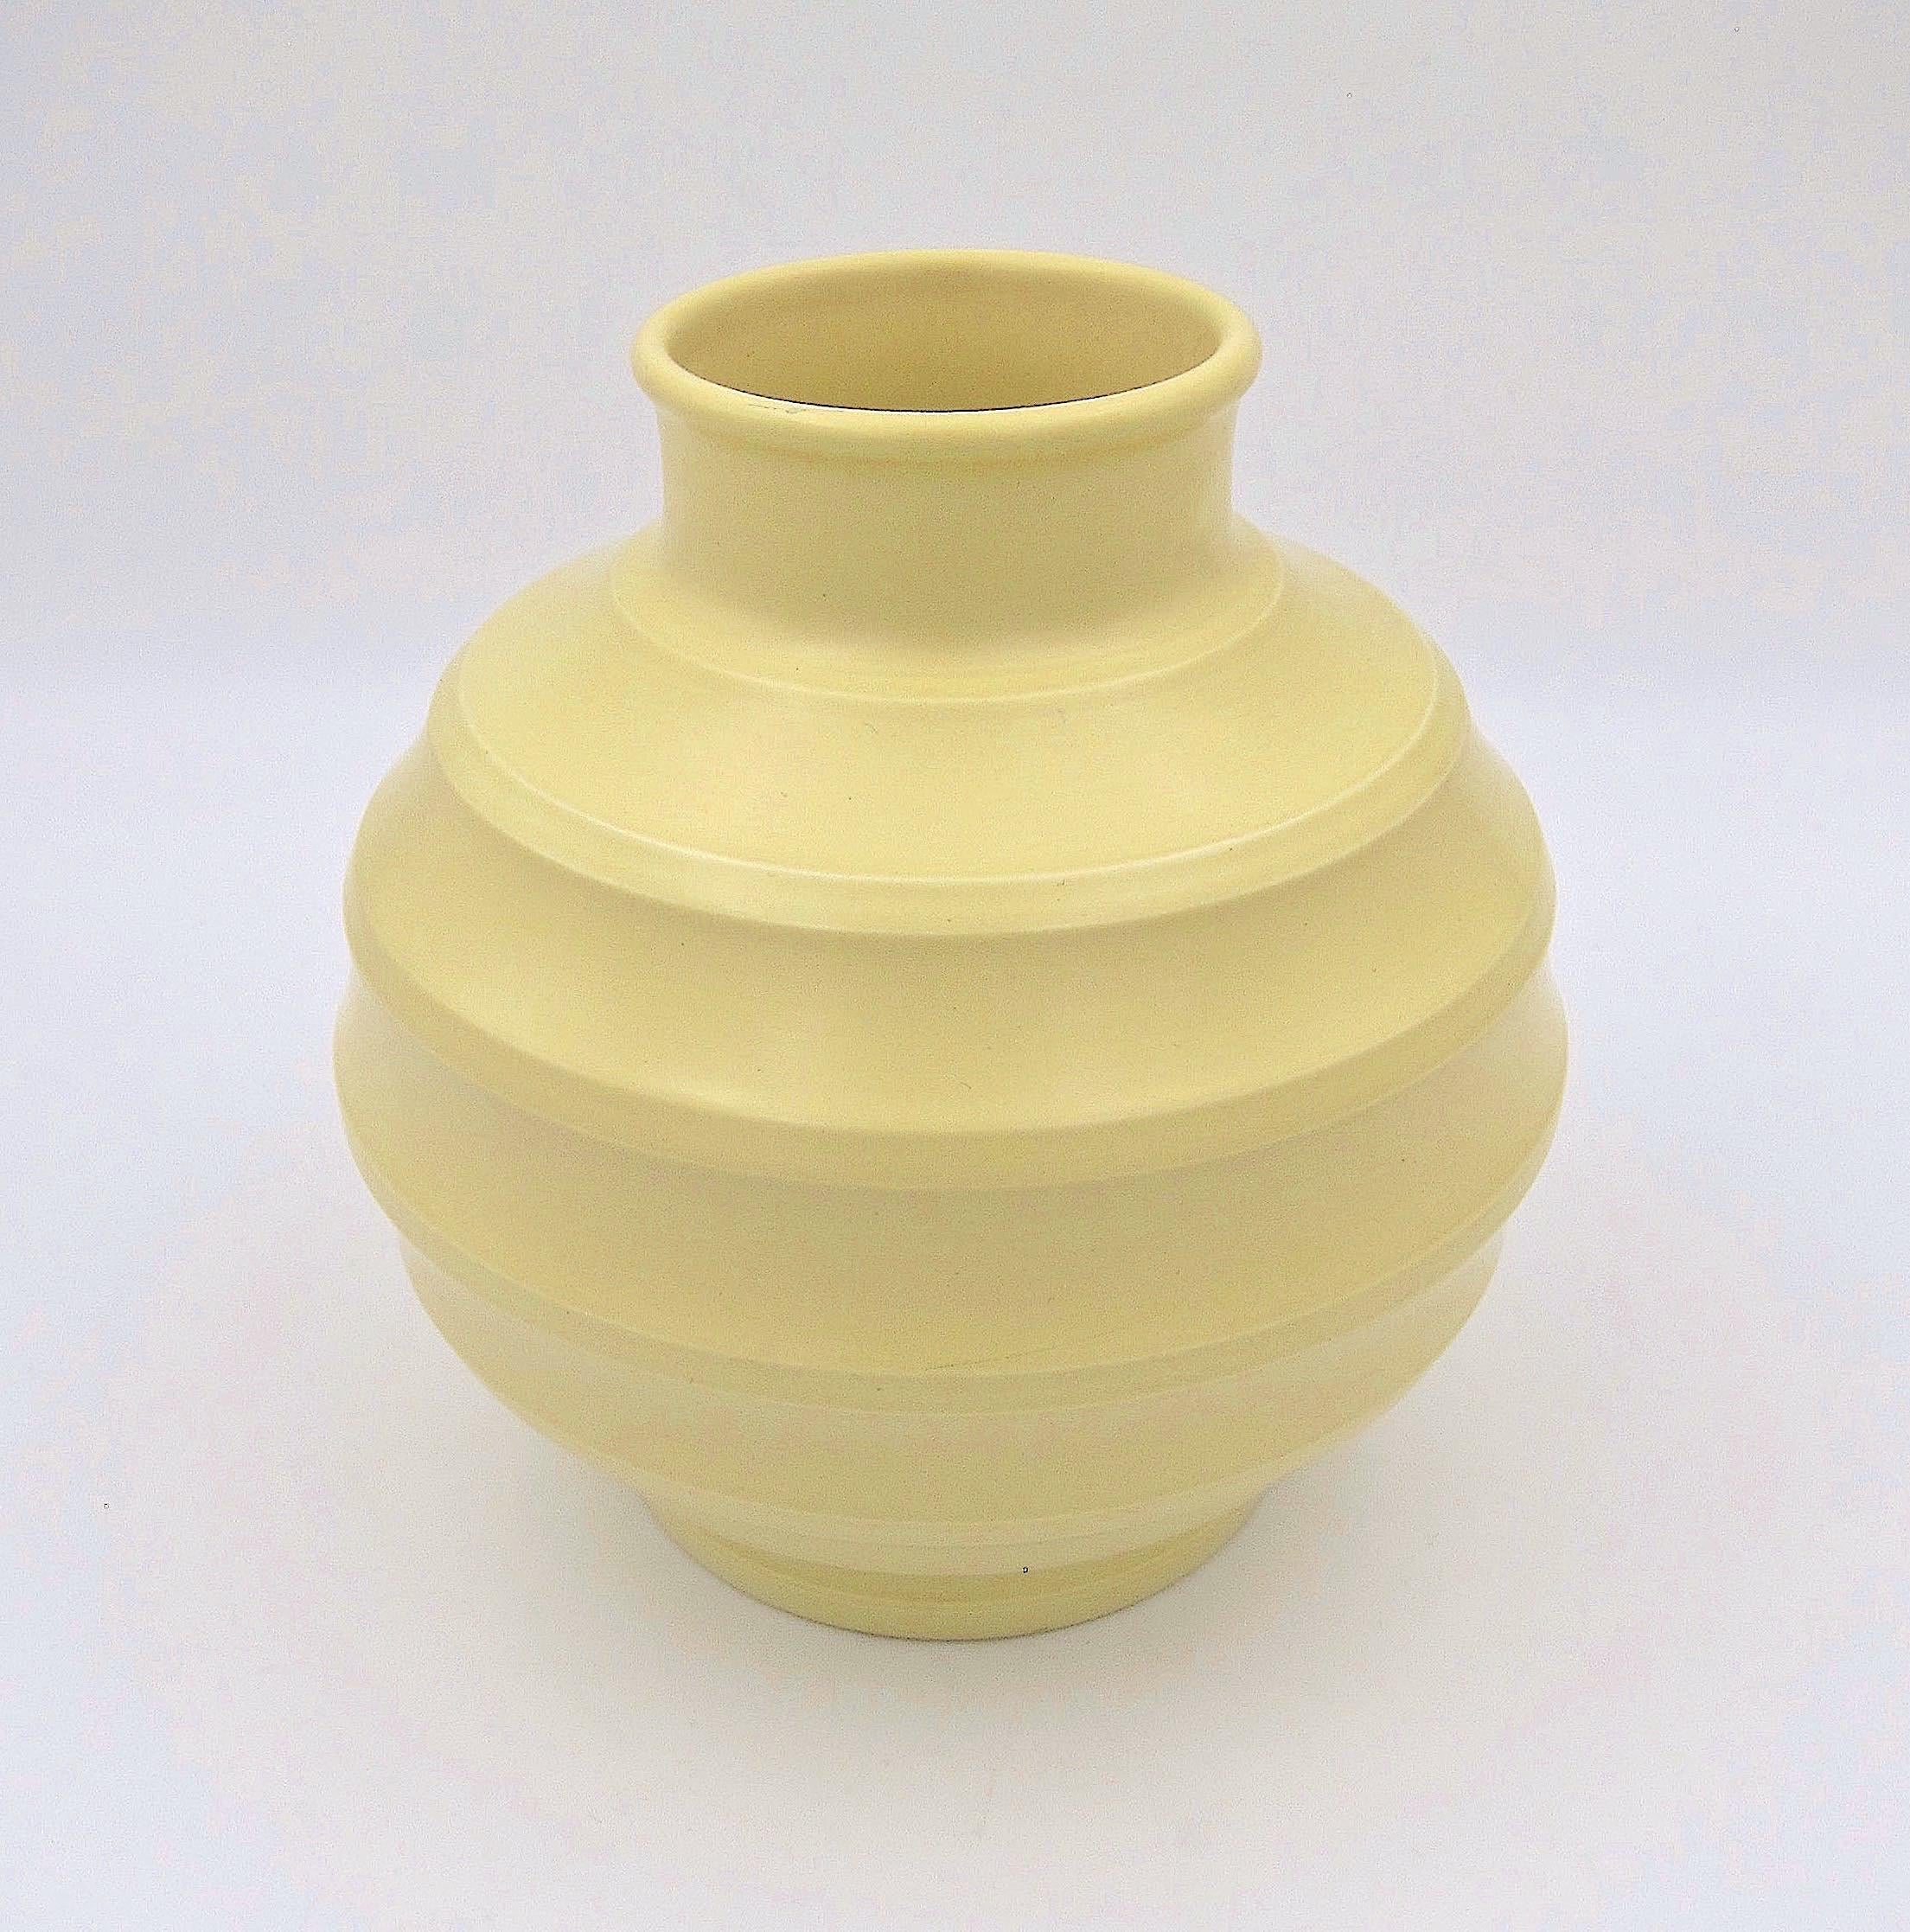 A spherical Art Deco vase by New Zealand born architect, potter, and designer, Keith Murray (1892-1981) for Wedgwood of England, dating to the 1940s. Murray designed this vase in 1932 and his 